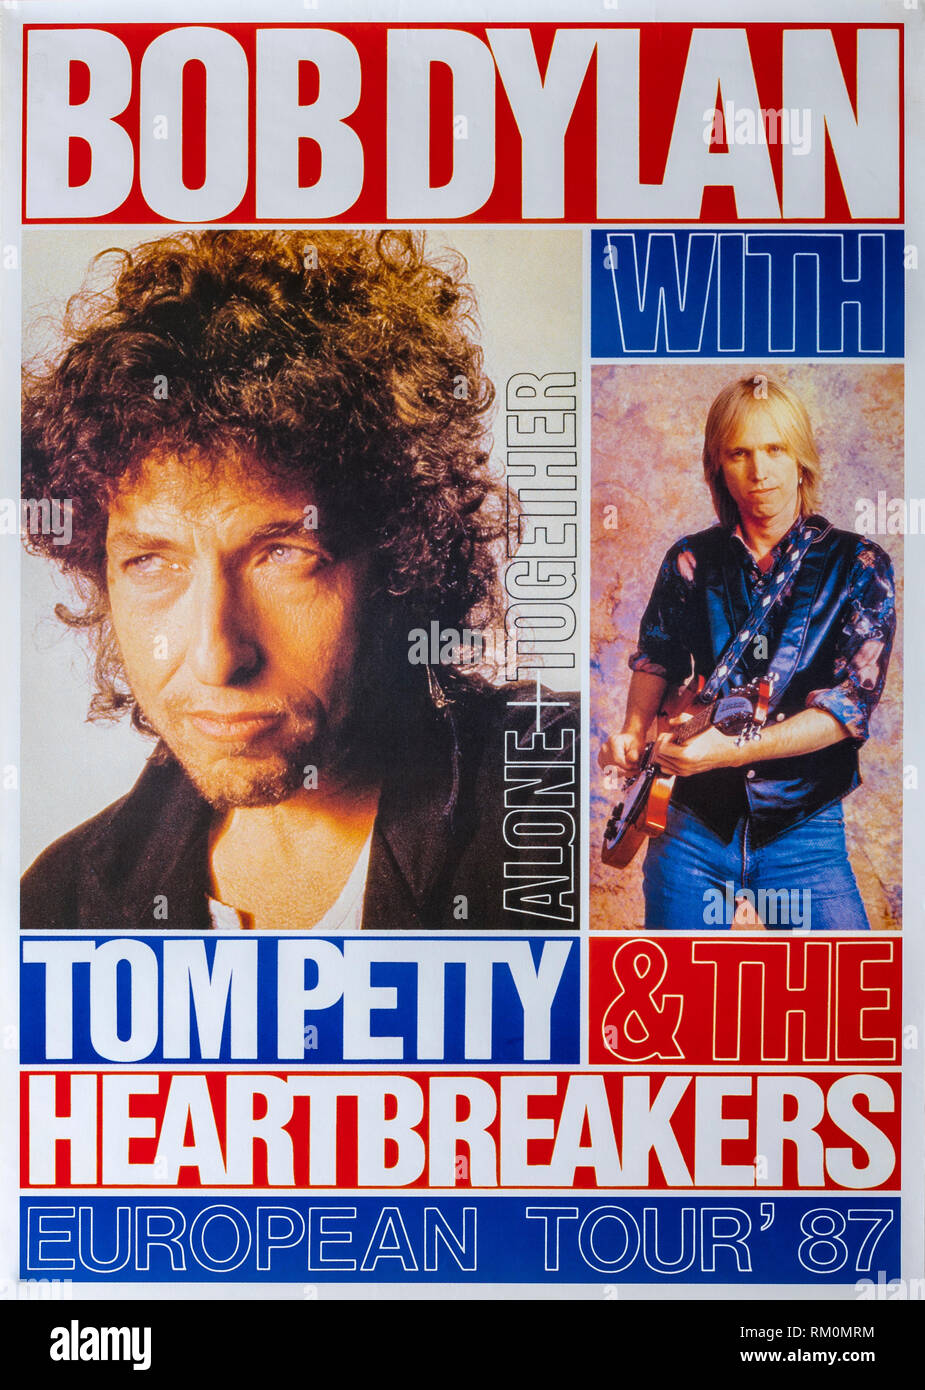 Bod Dylan with Tom Petty and the Heartbreakers European tour 1987, Musical concert poster Stock Photo